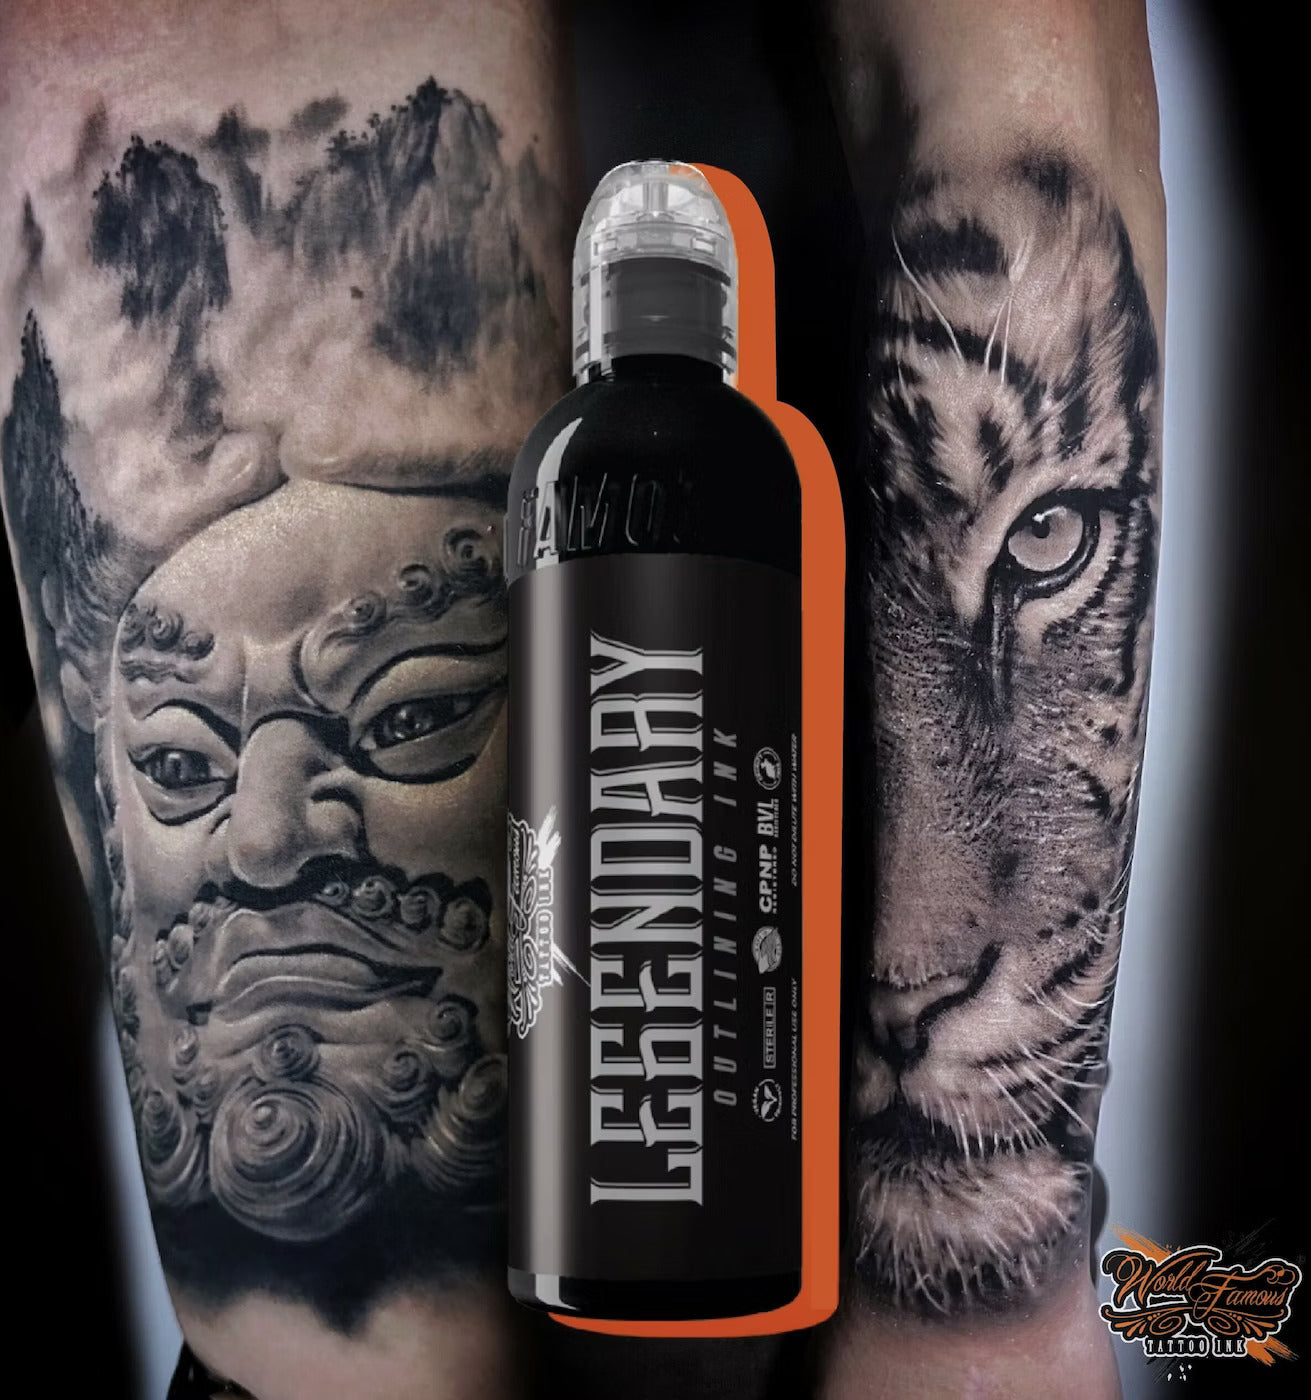 World Famous Legendary Outlining Ink | World Famous Tattoo Ink